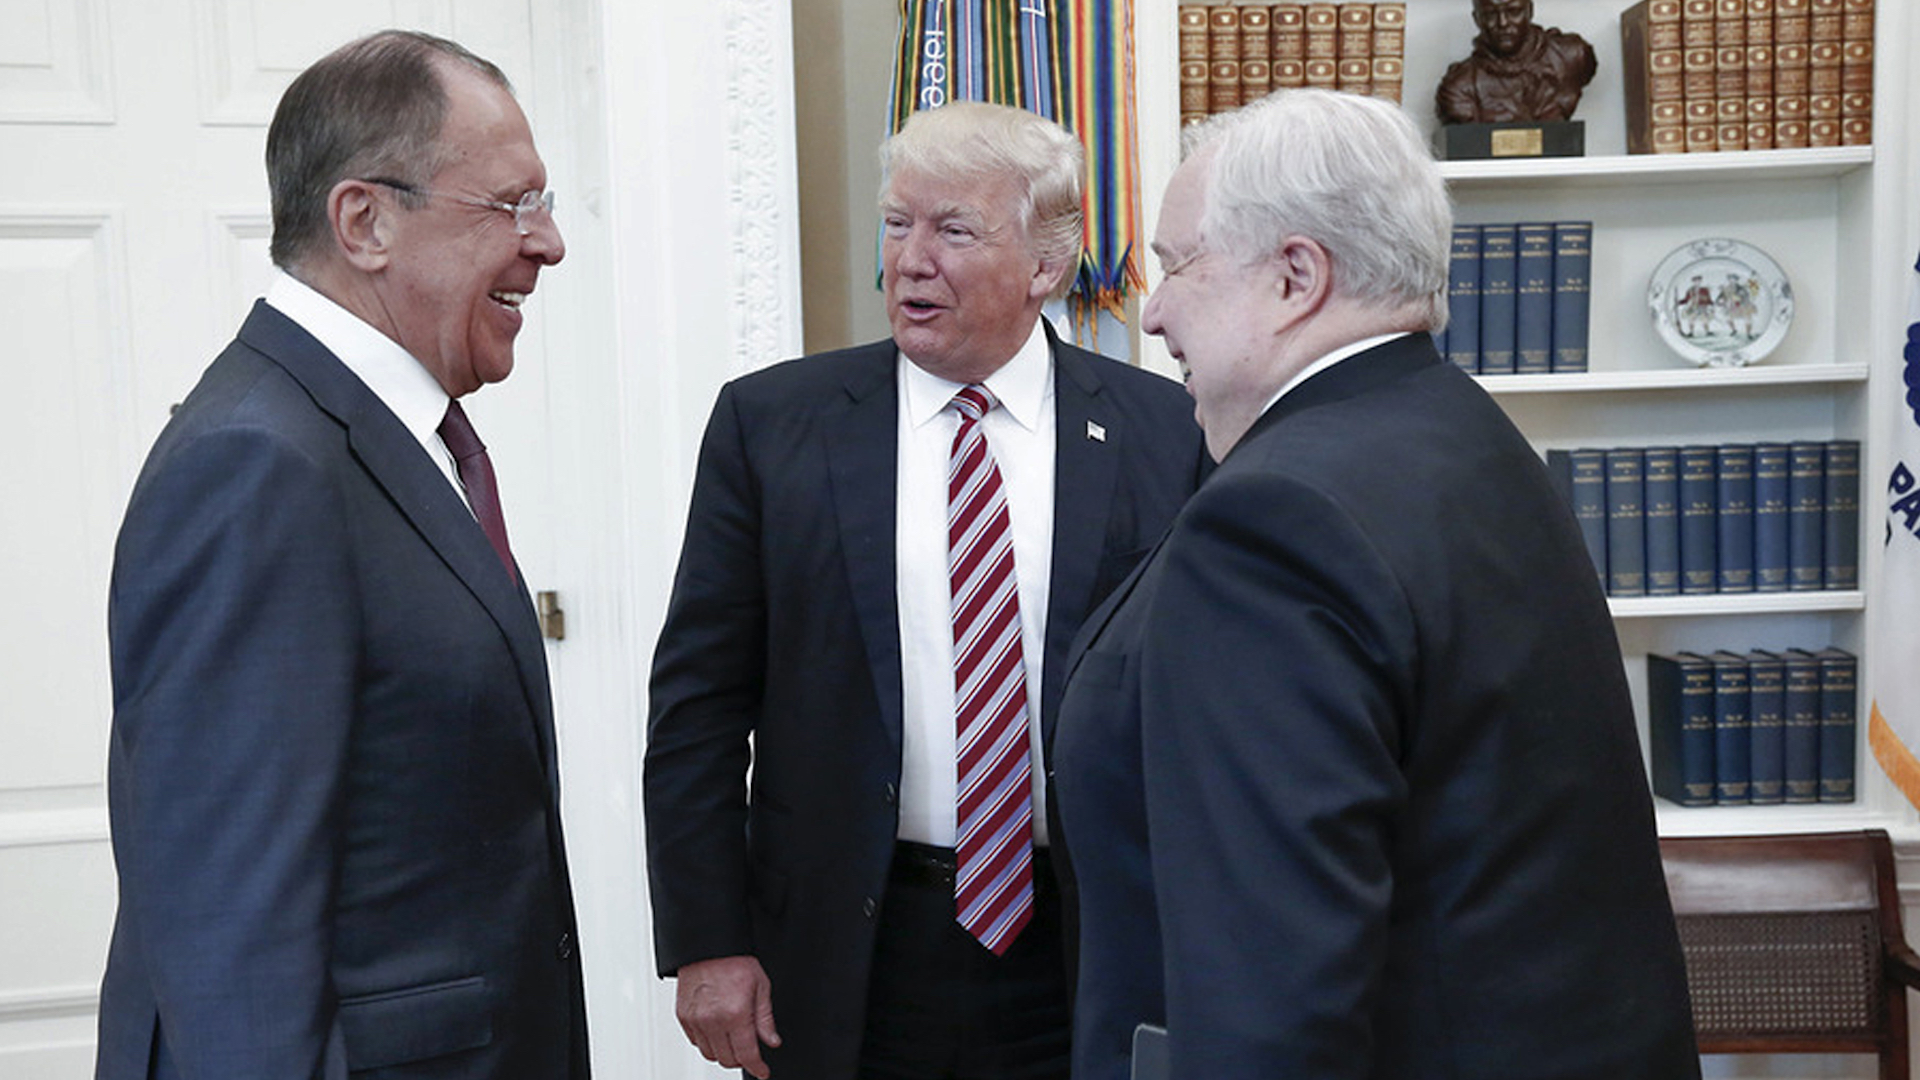 Trump revealed highly classified information to Russian foreign minister  and ambassador - The Washington Post